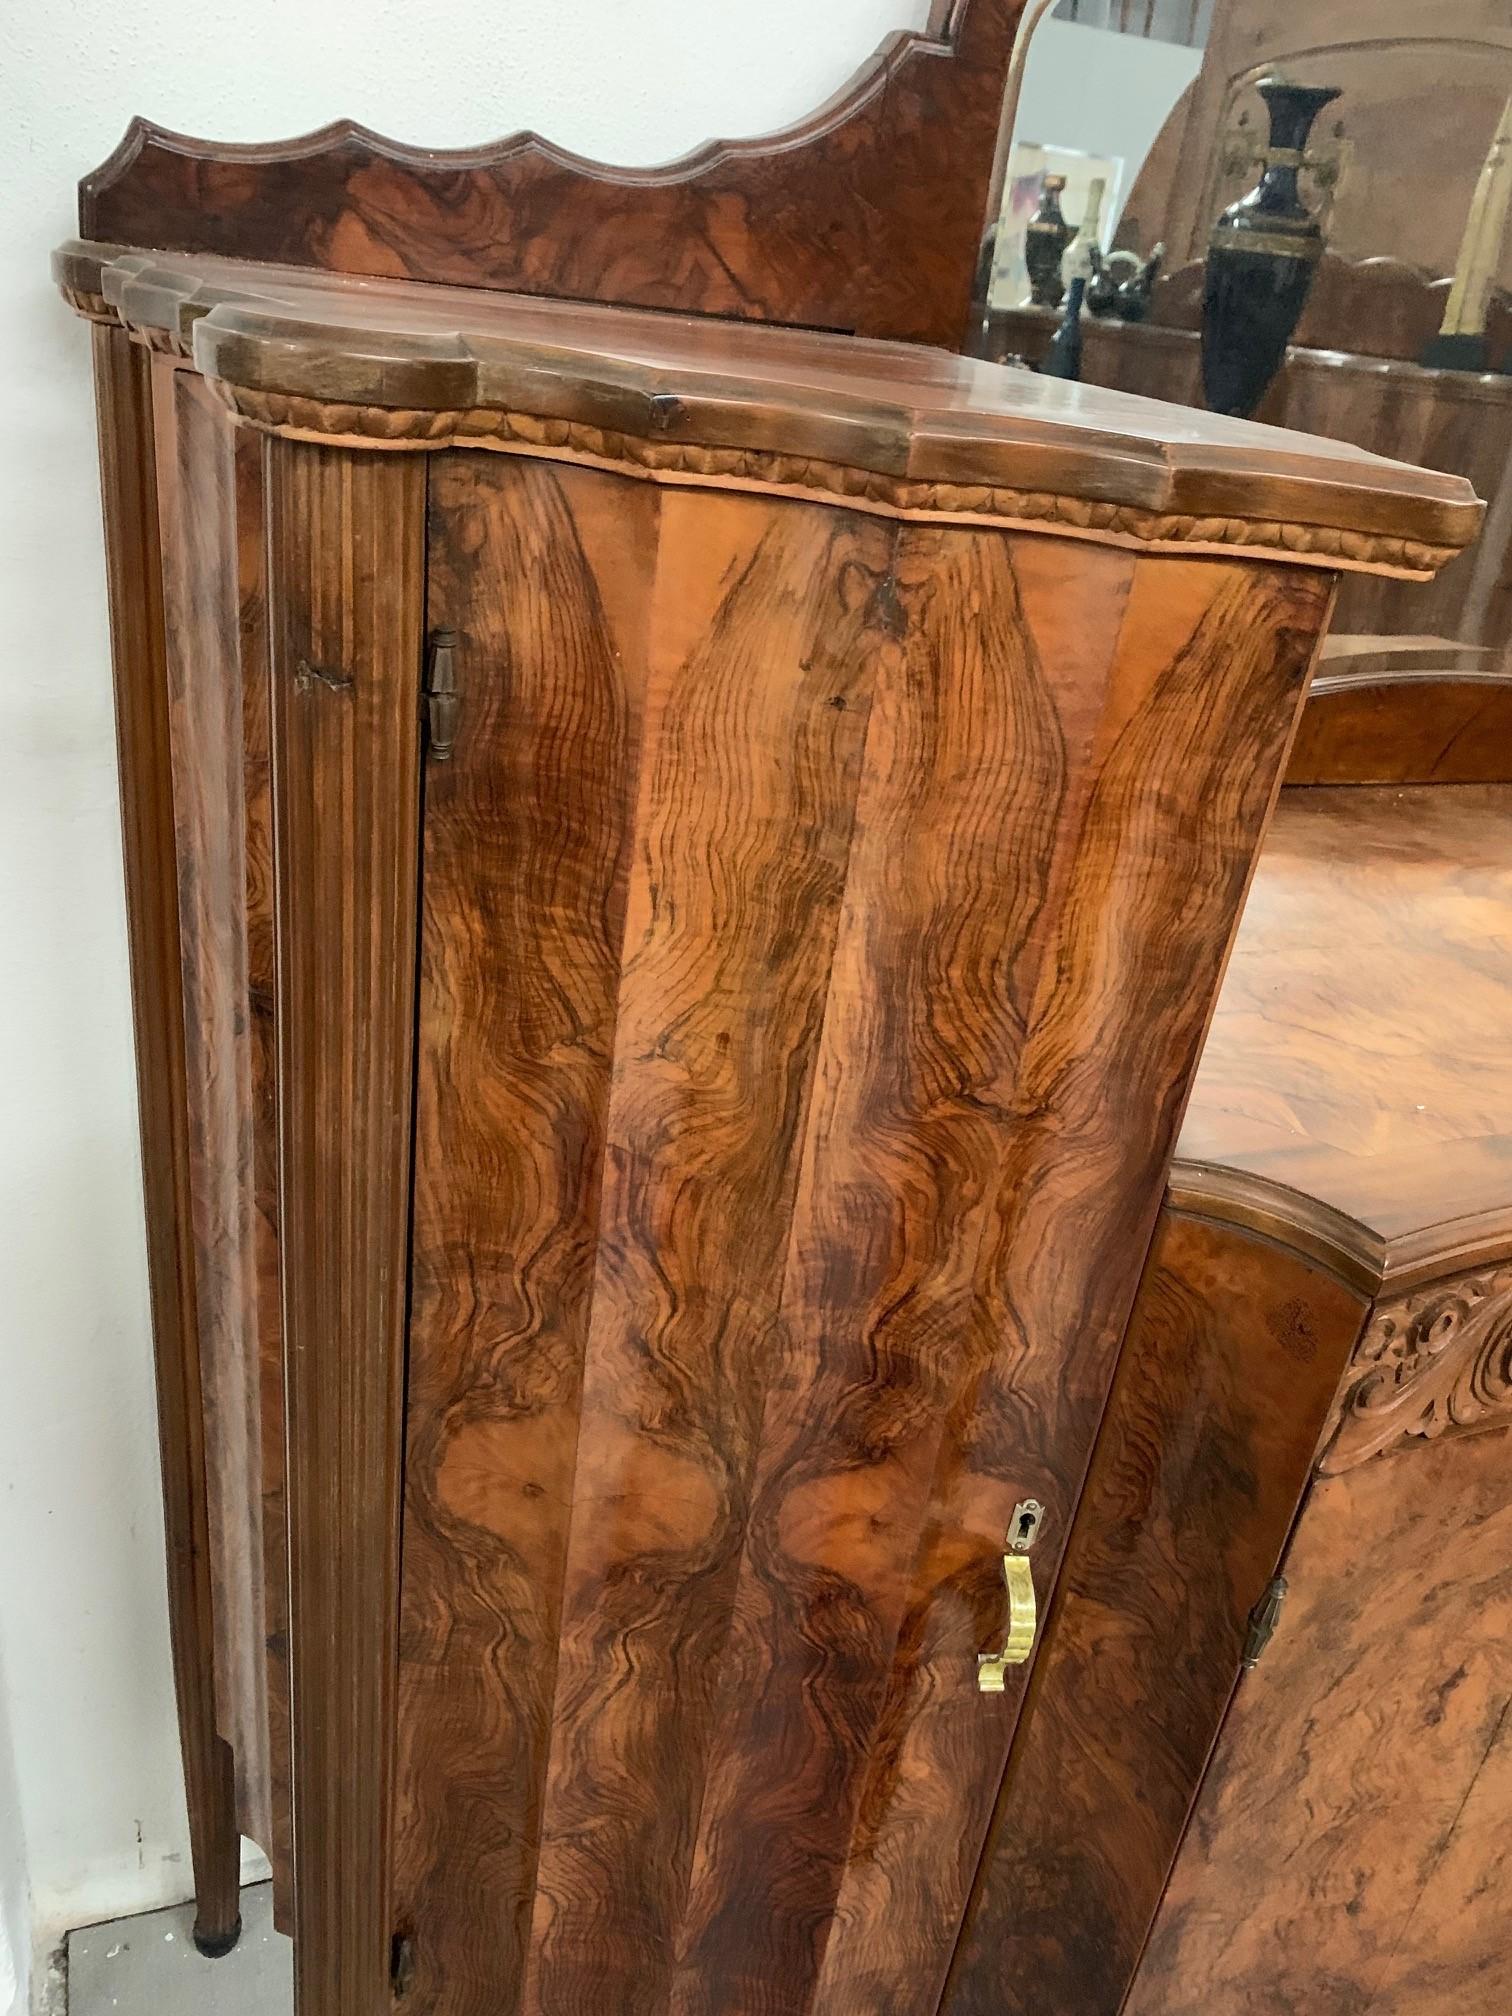 Art Deco sideboard by Meroni & Fossati, walnut and walnut briar, Body with a wave-shaped veneered with selection briar veneer and supported by grooved pilasters that end in black lacquered ball foot, the handles are in gold metal, bronze hinges,